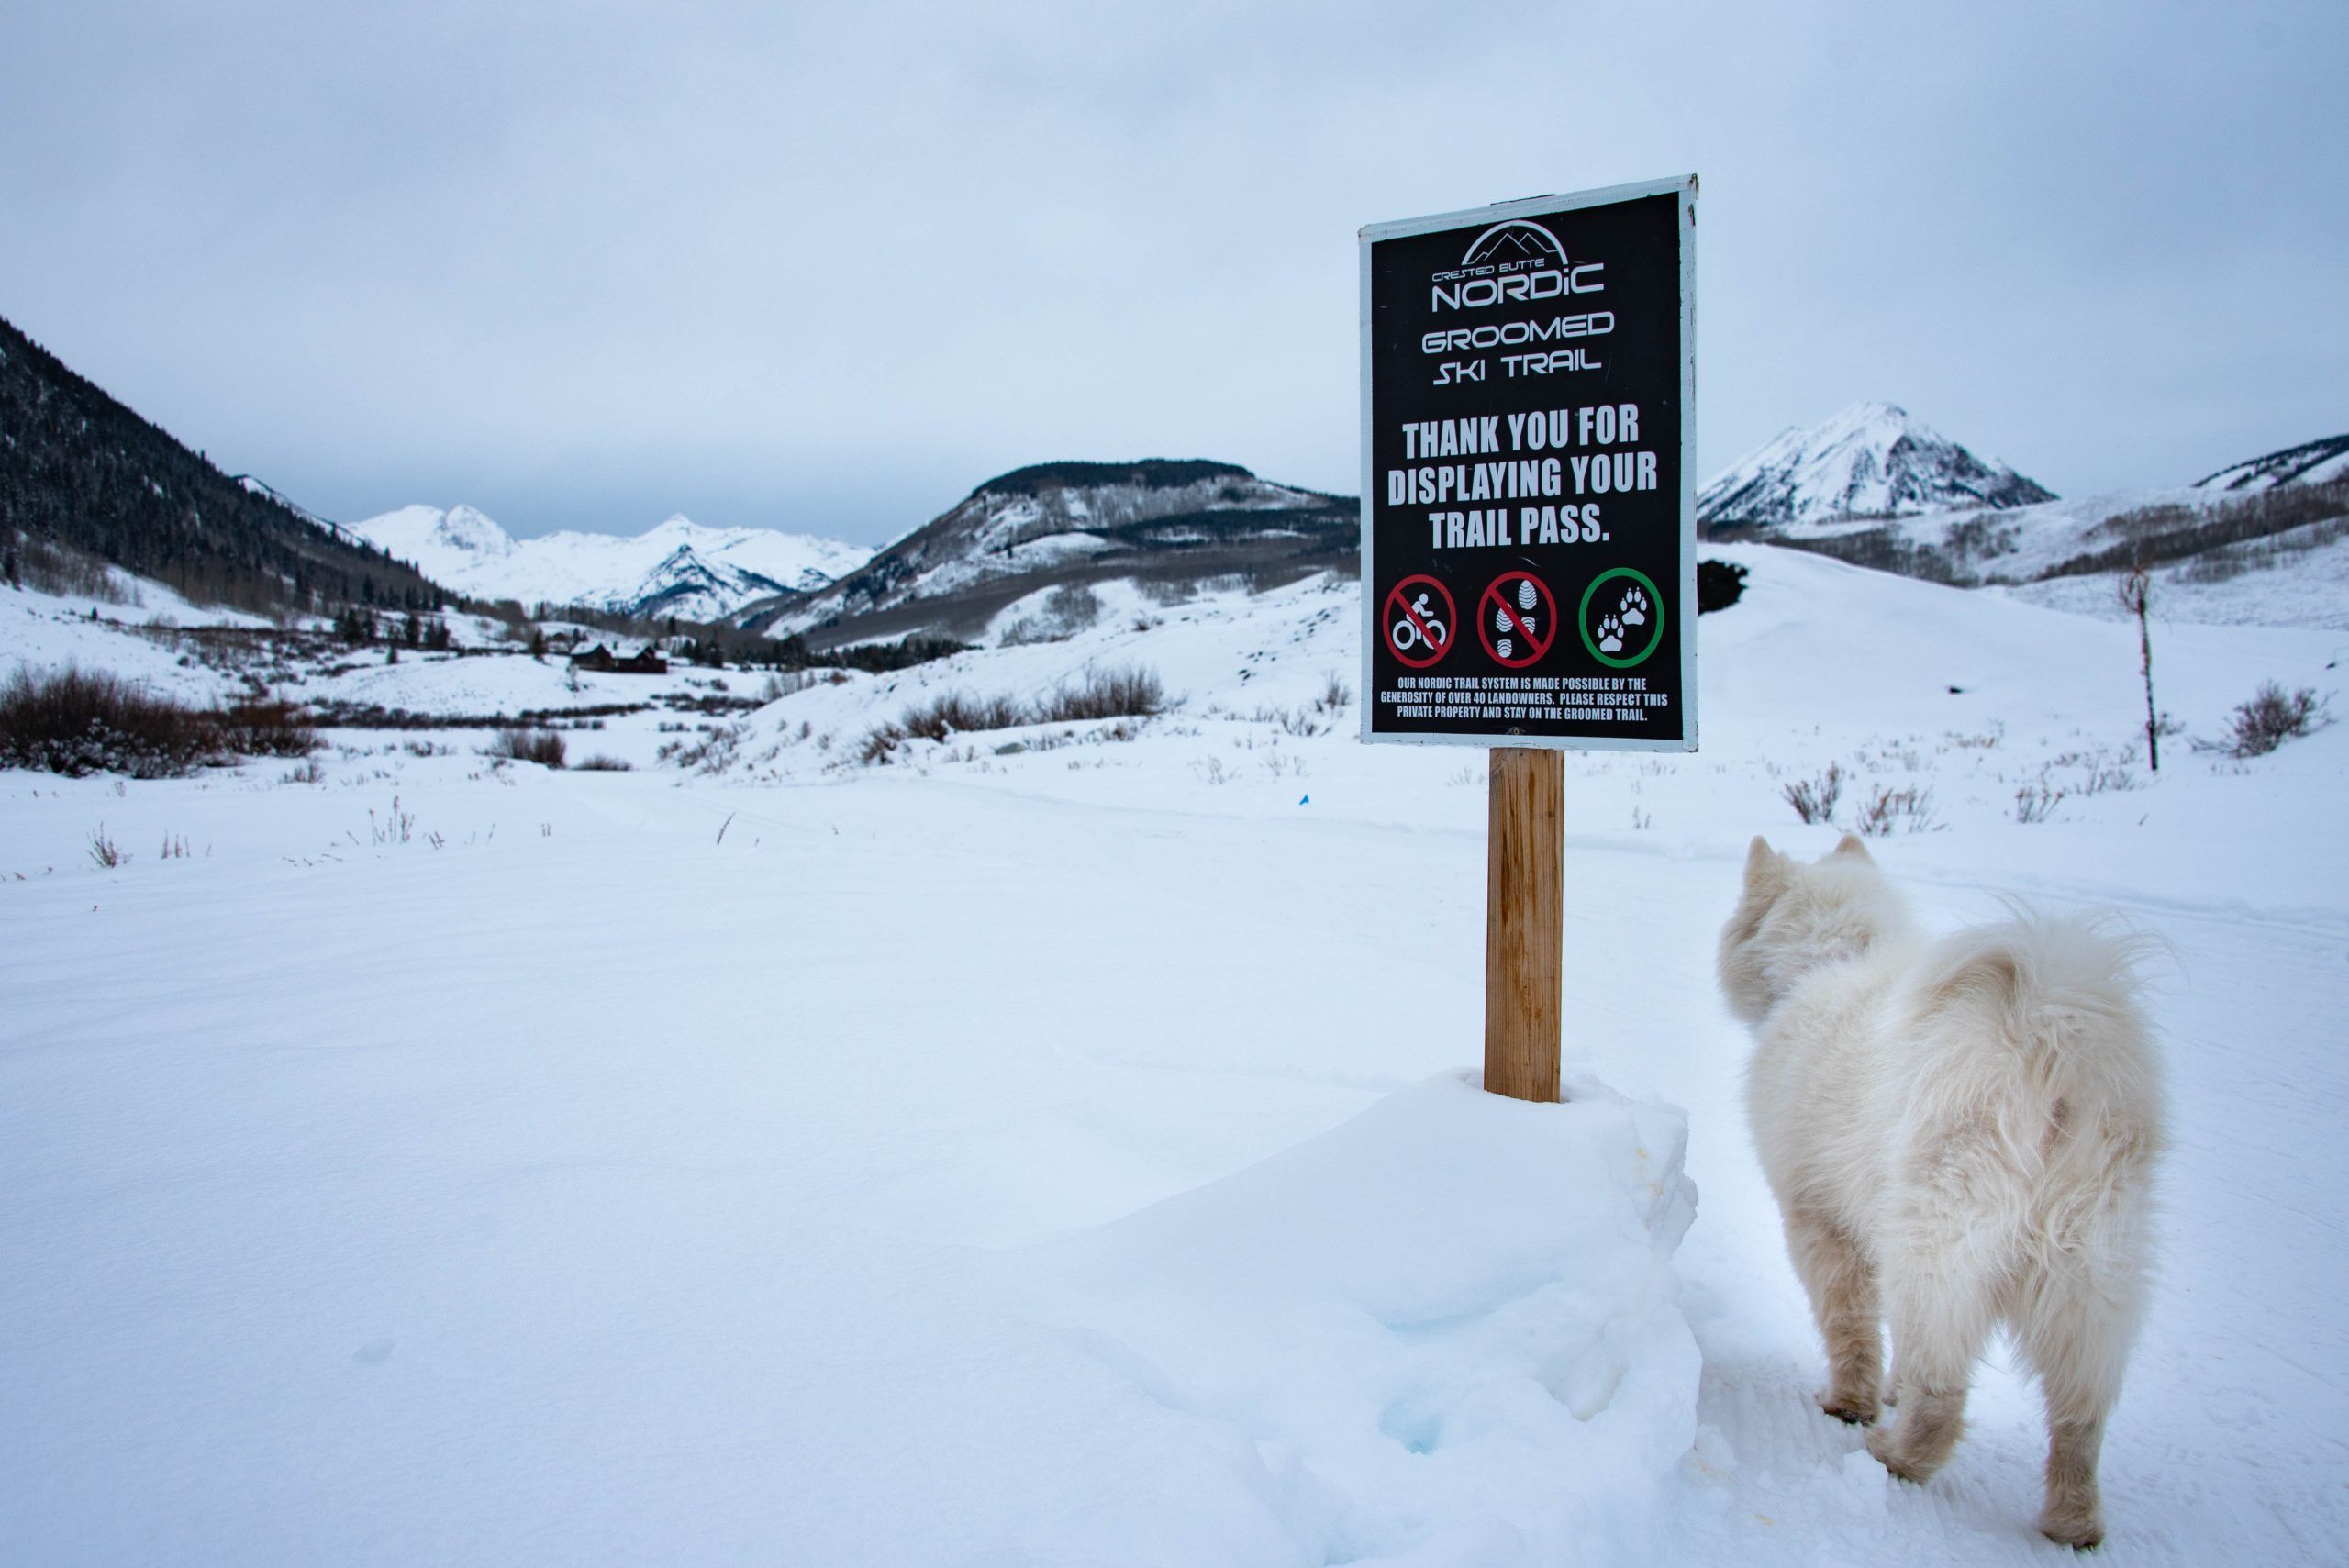 A trail sign at the Crested Butte Nordic Center in Crested Butte, Colorado explains that a trail pass is needed to ski the trails.